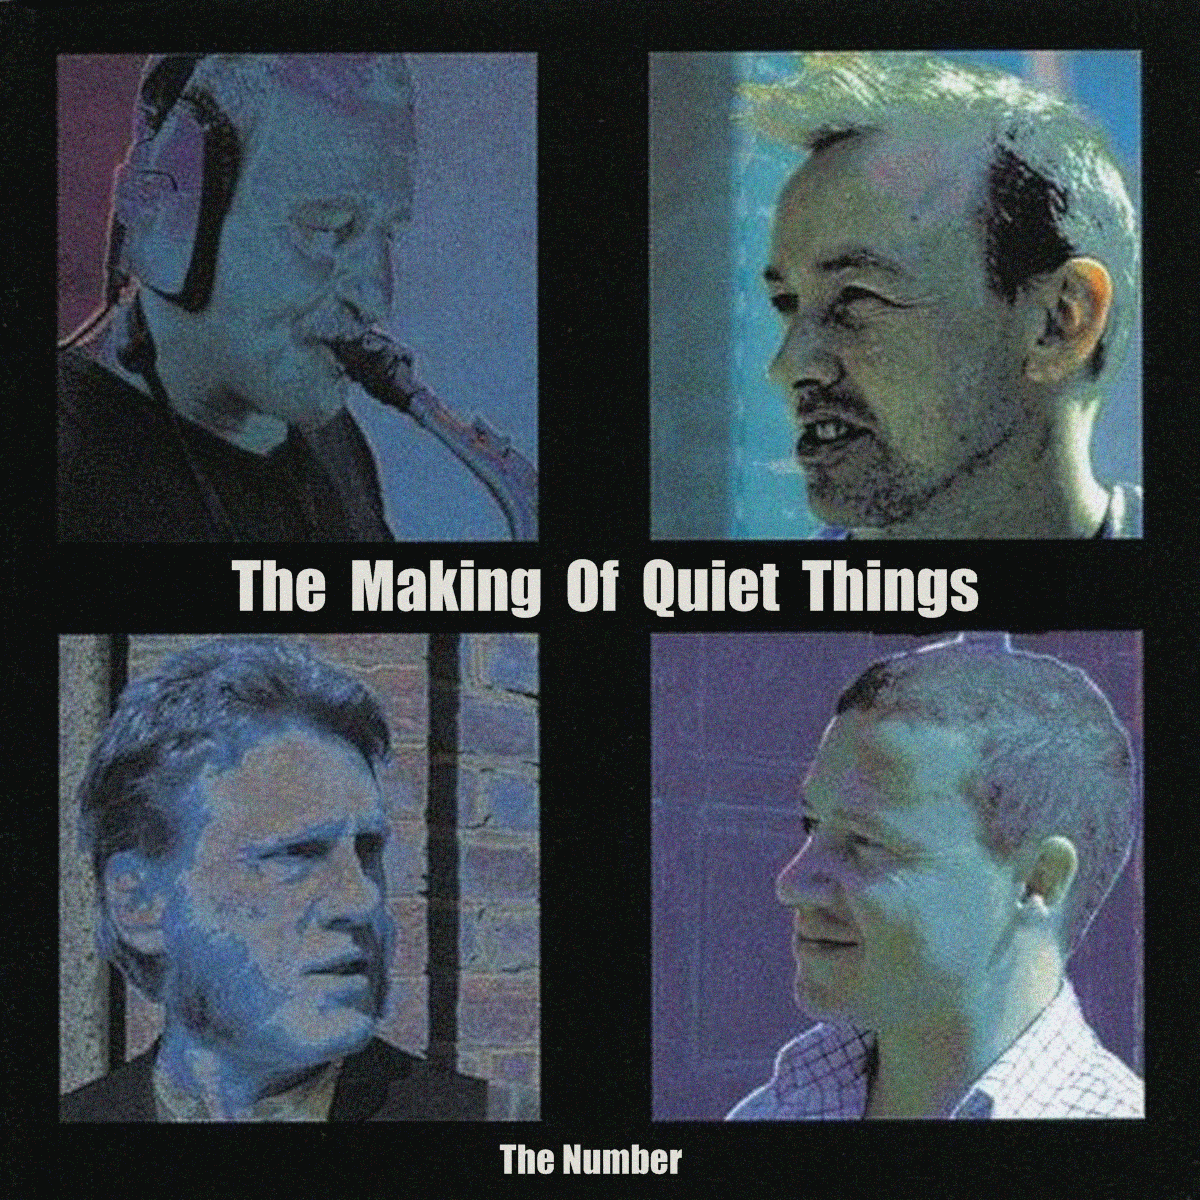 Quiet things. The number – the making of quiet things. Gary Curson,Keith Tippett,John Edwards,Mark Sanders - Continuum. Something quiet skele.